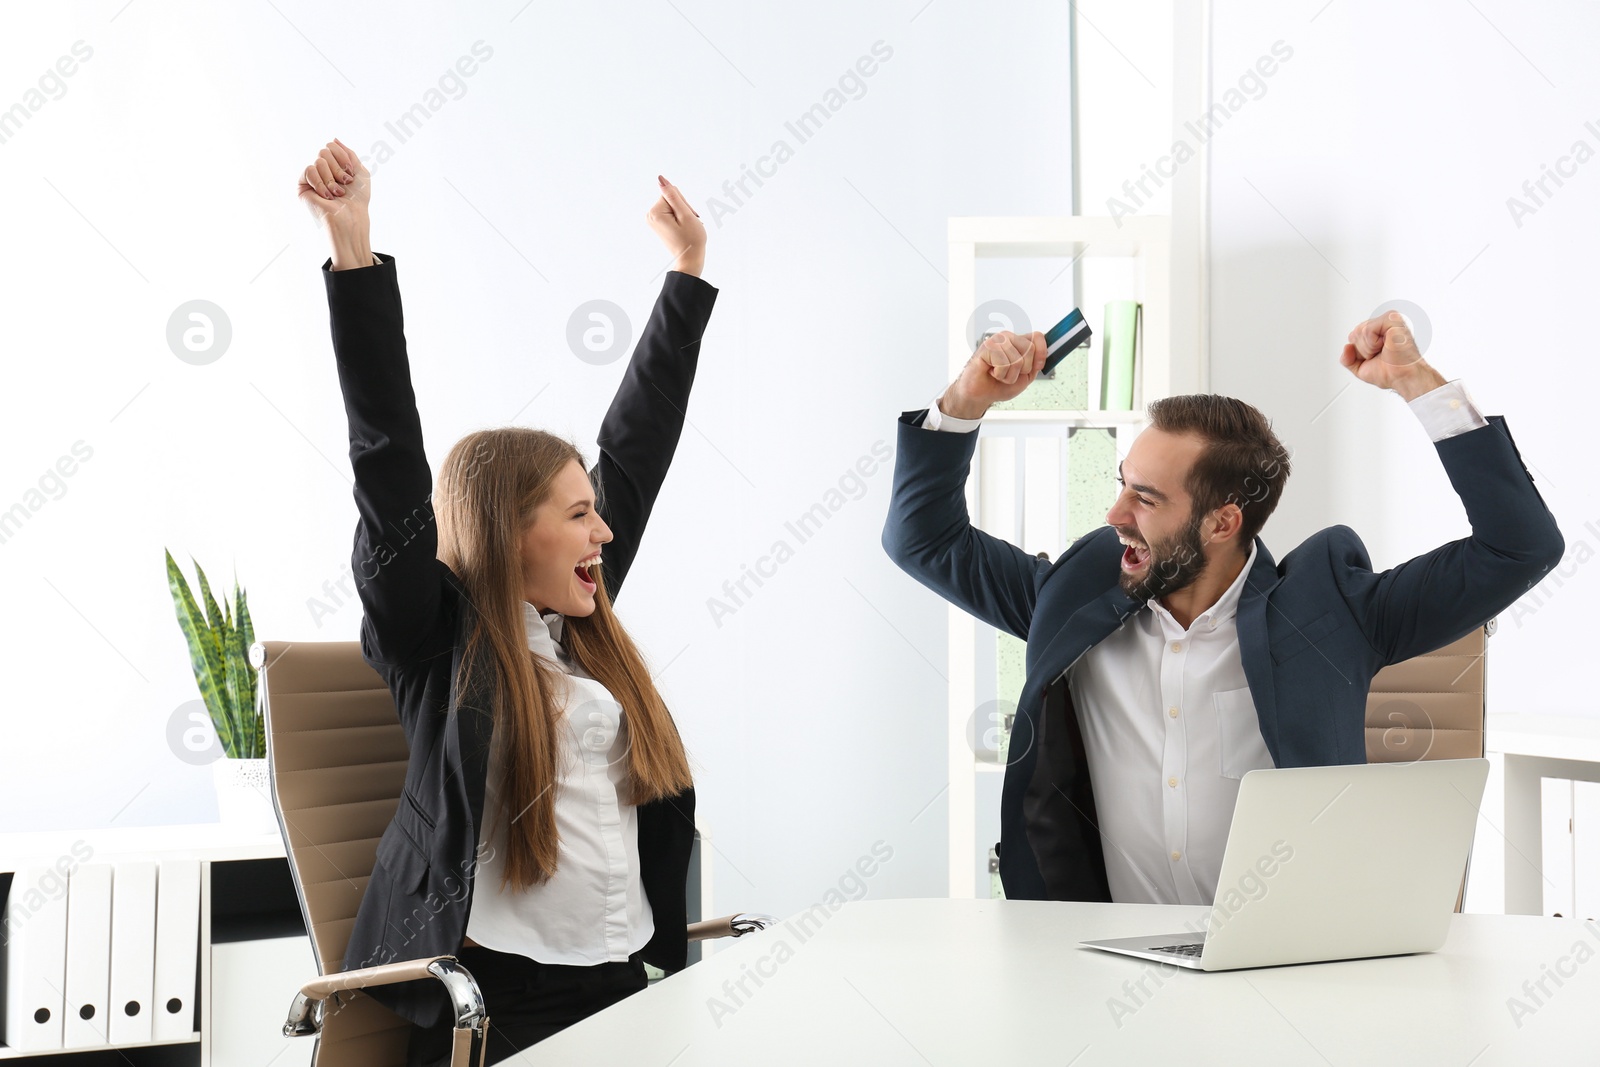 Photo of Emotional young people with credit card and laptop celebrating victory in office